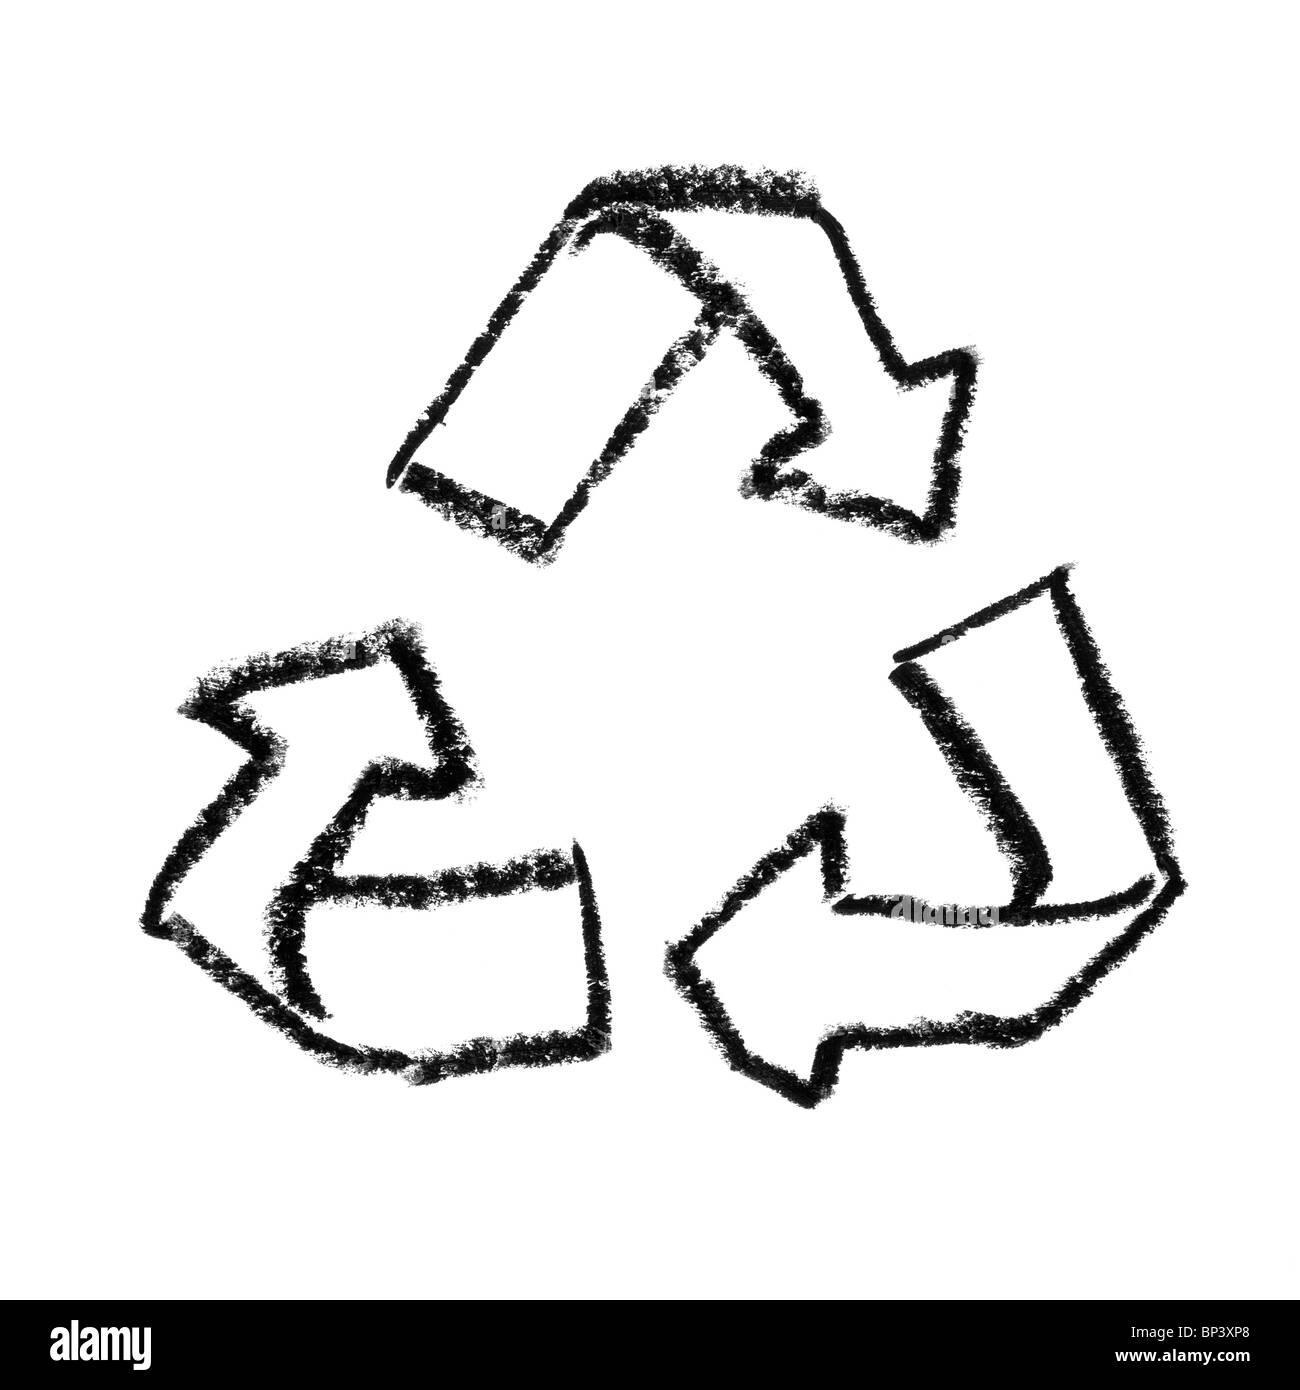 Reuse Symbol, Outline. Drawn chalk, isolated on white. Stock Photo